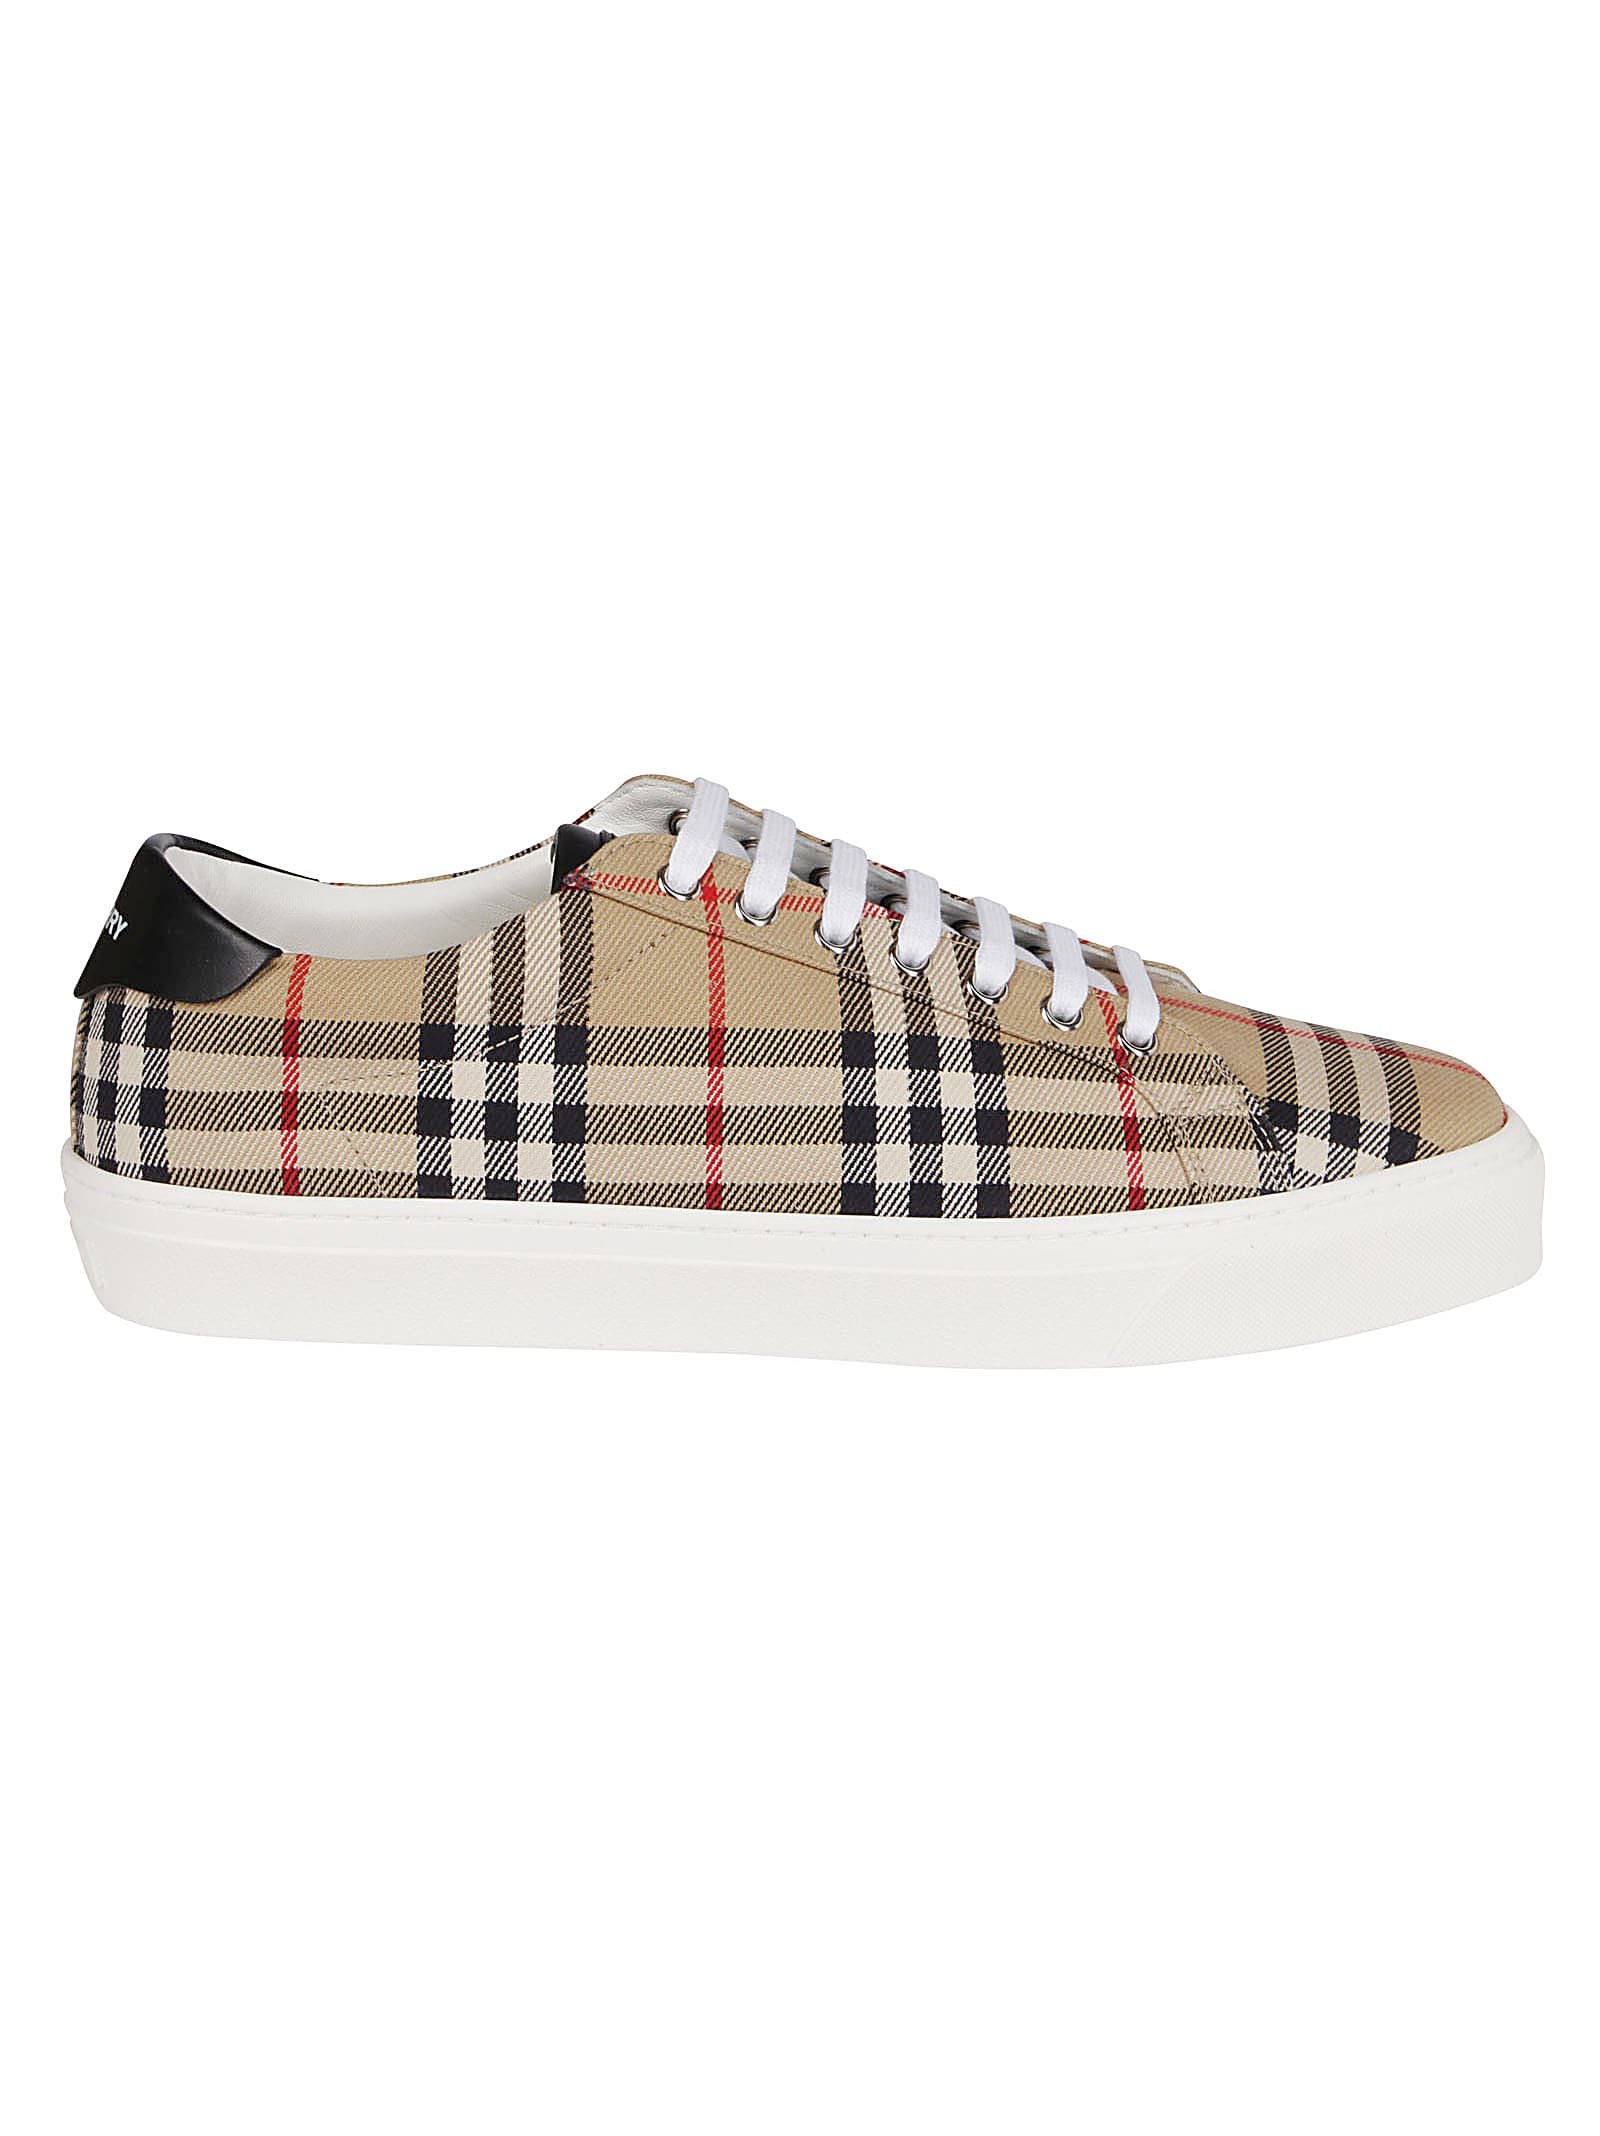 BURBERRY BEIGE CANVAS SNEAKERS,8038185 A7026